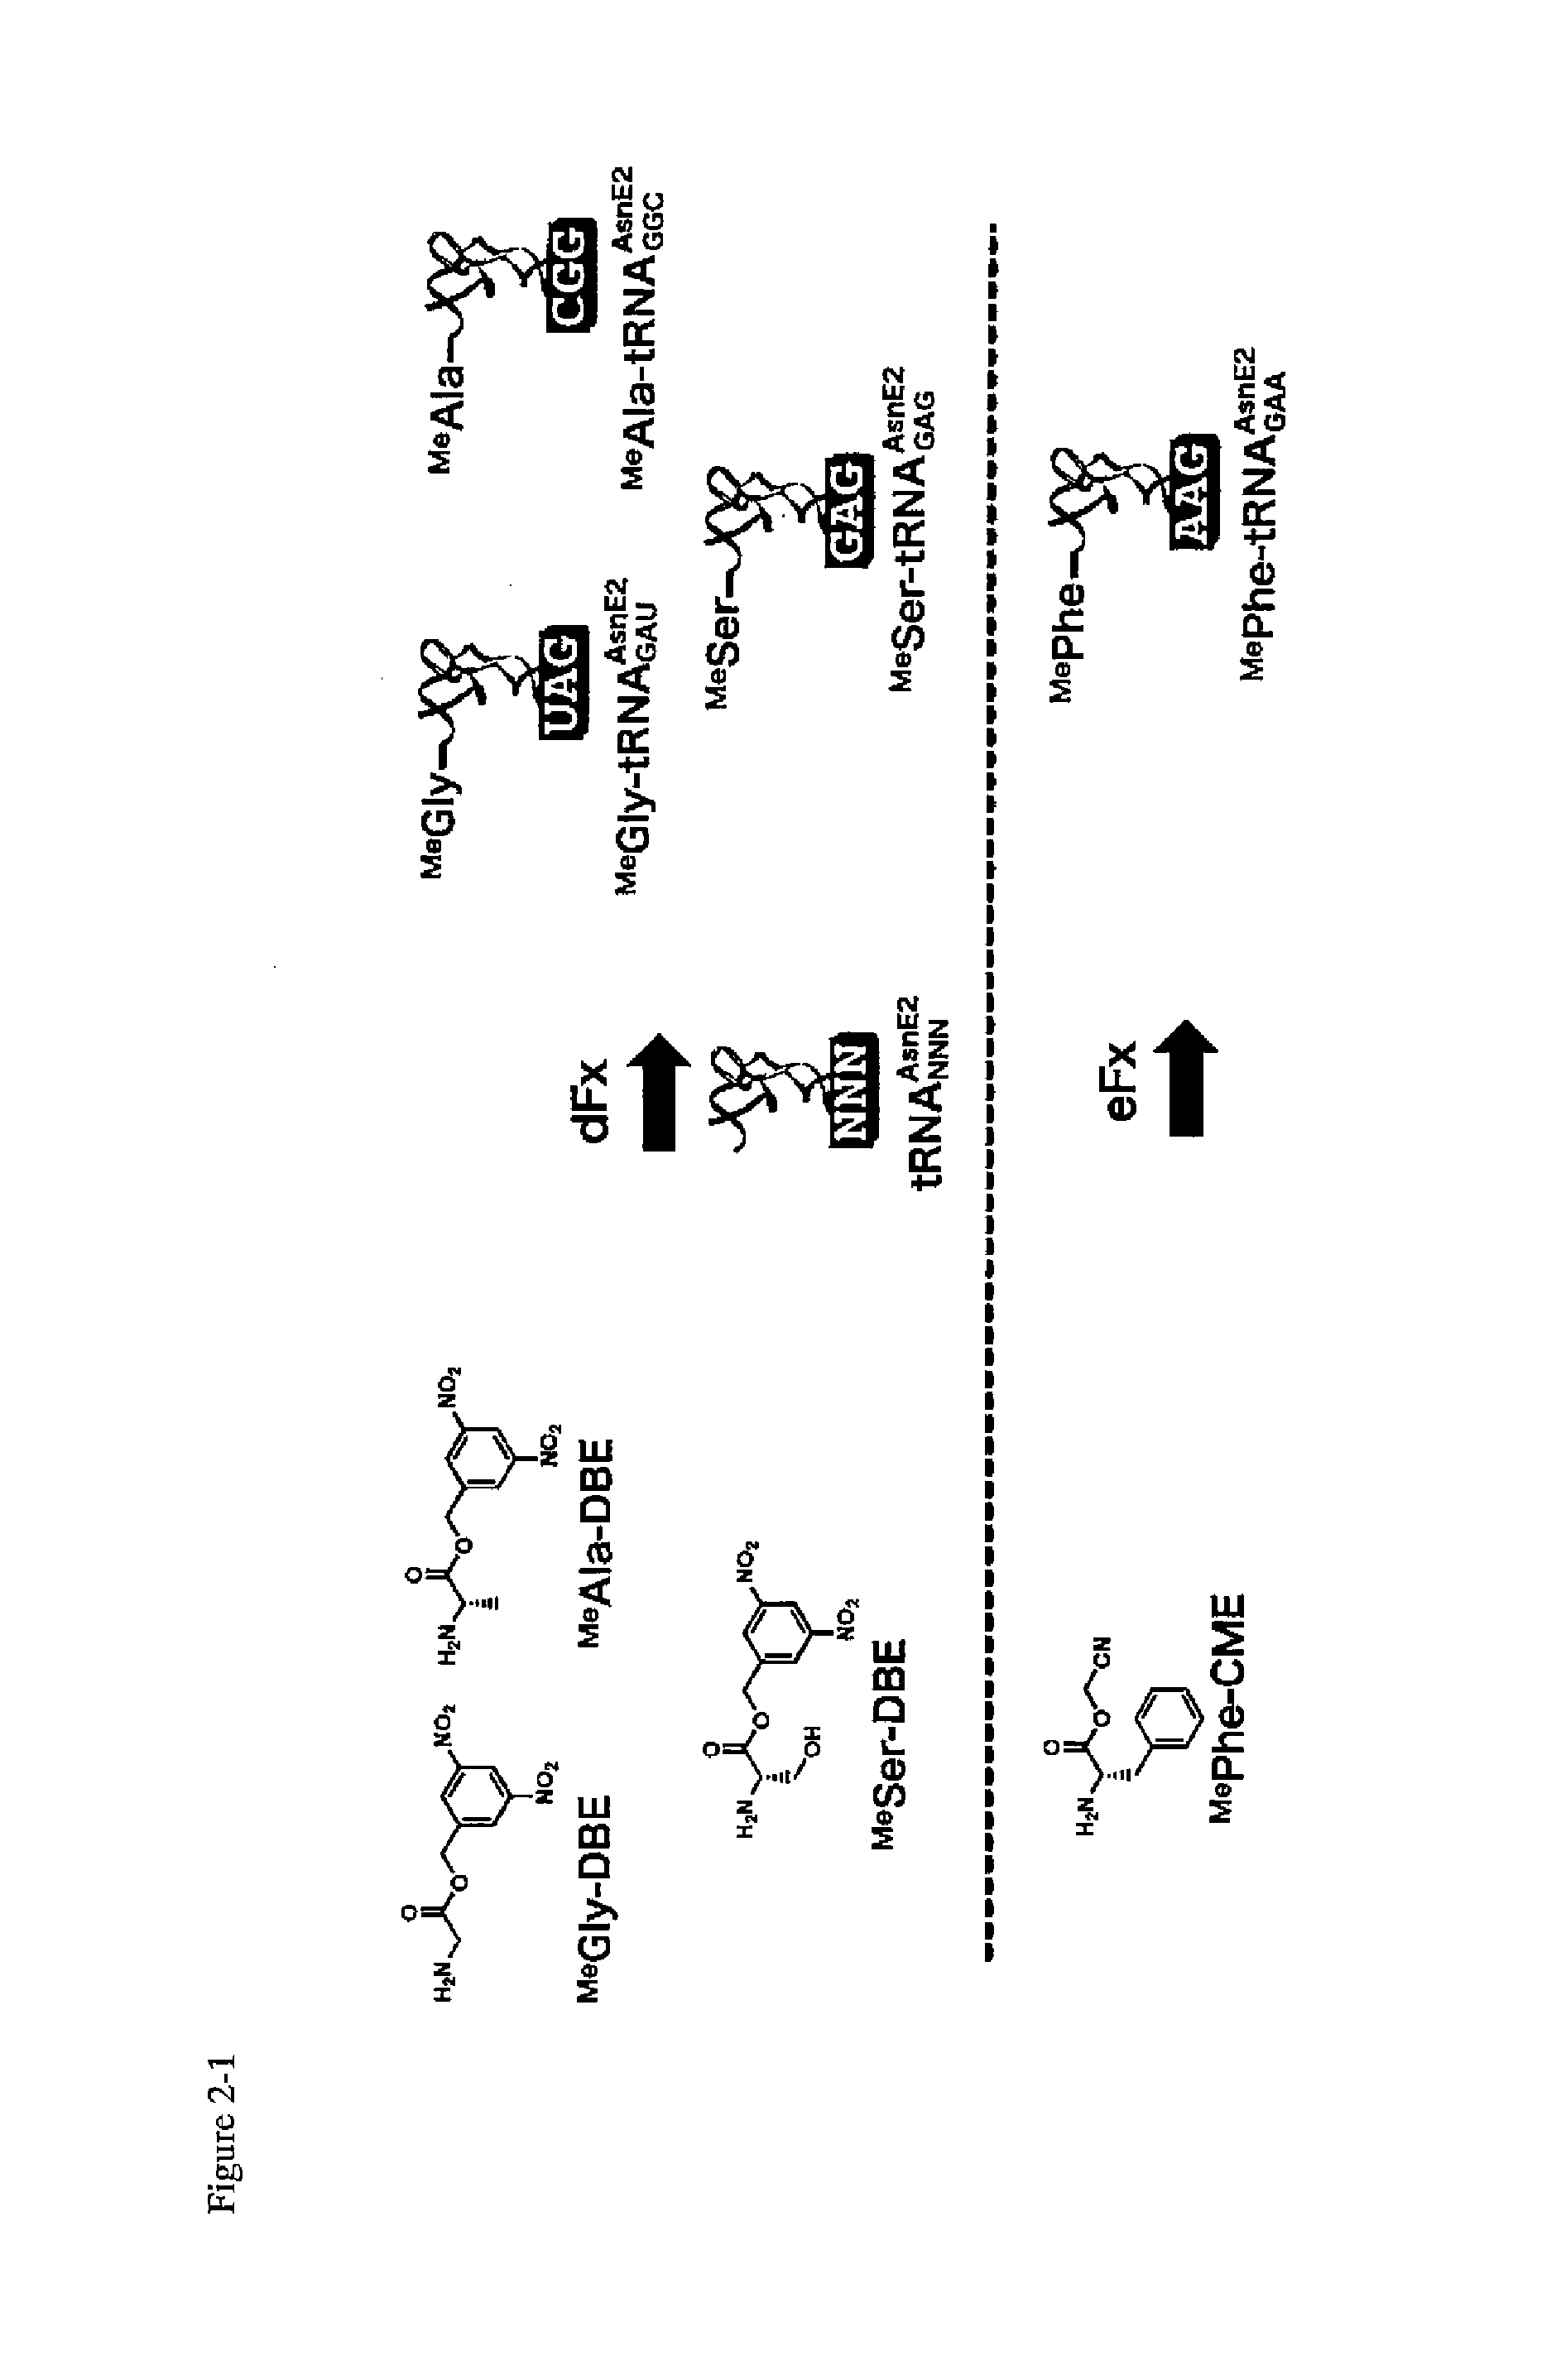 Method for constructing libraries of non-standard peptide compounds comprising N-methyl amino acids and other special (non-standard) amino acids and method for searching and identifying active species